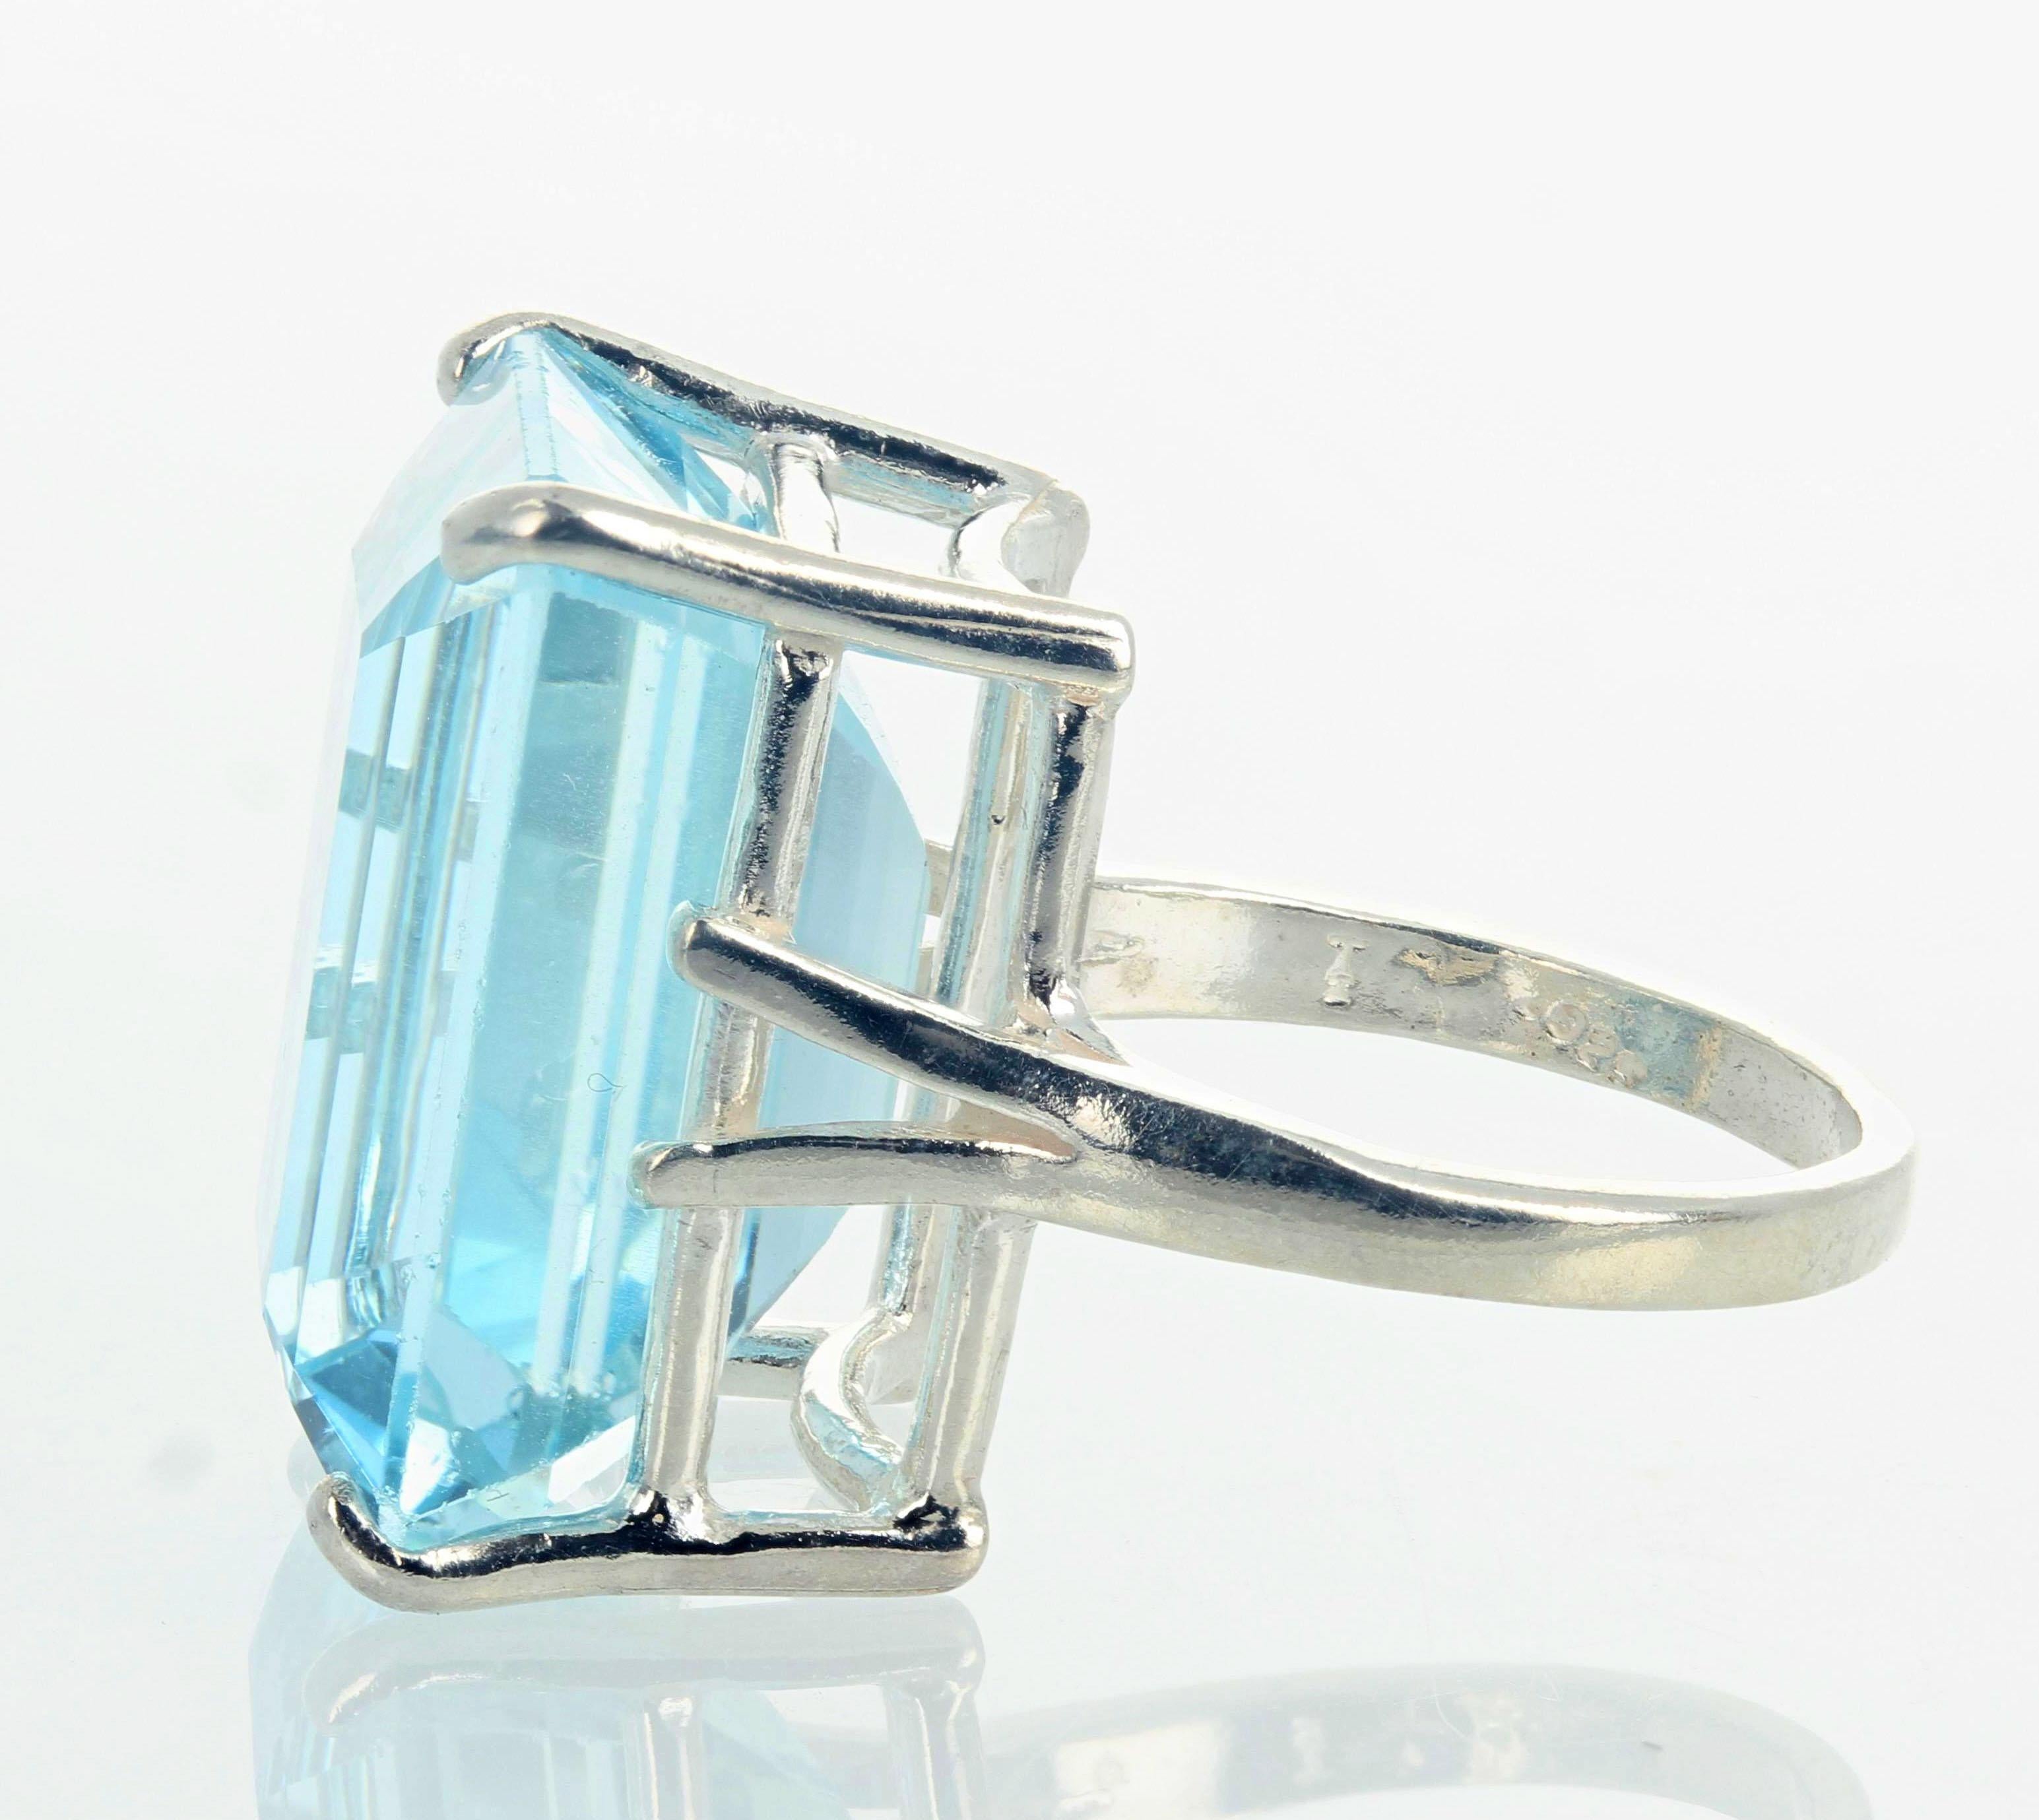 Women's or Men's AJD Gorgeous REAL Cushion Cut 18 Ct Natural Aquamarine Silver Solitaire Ring